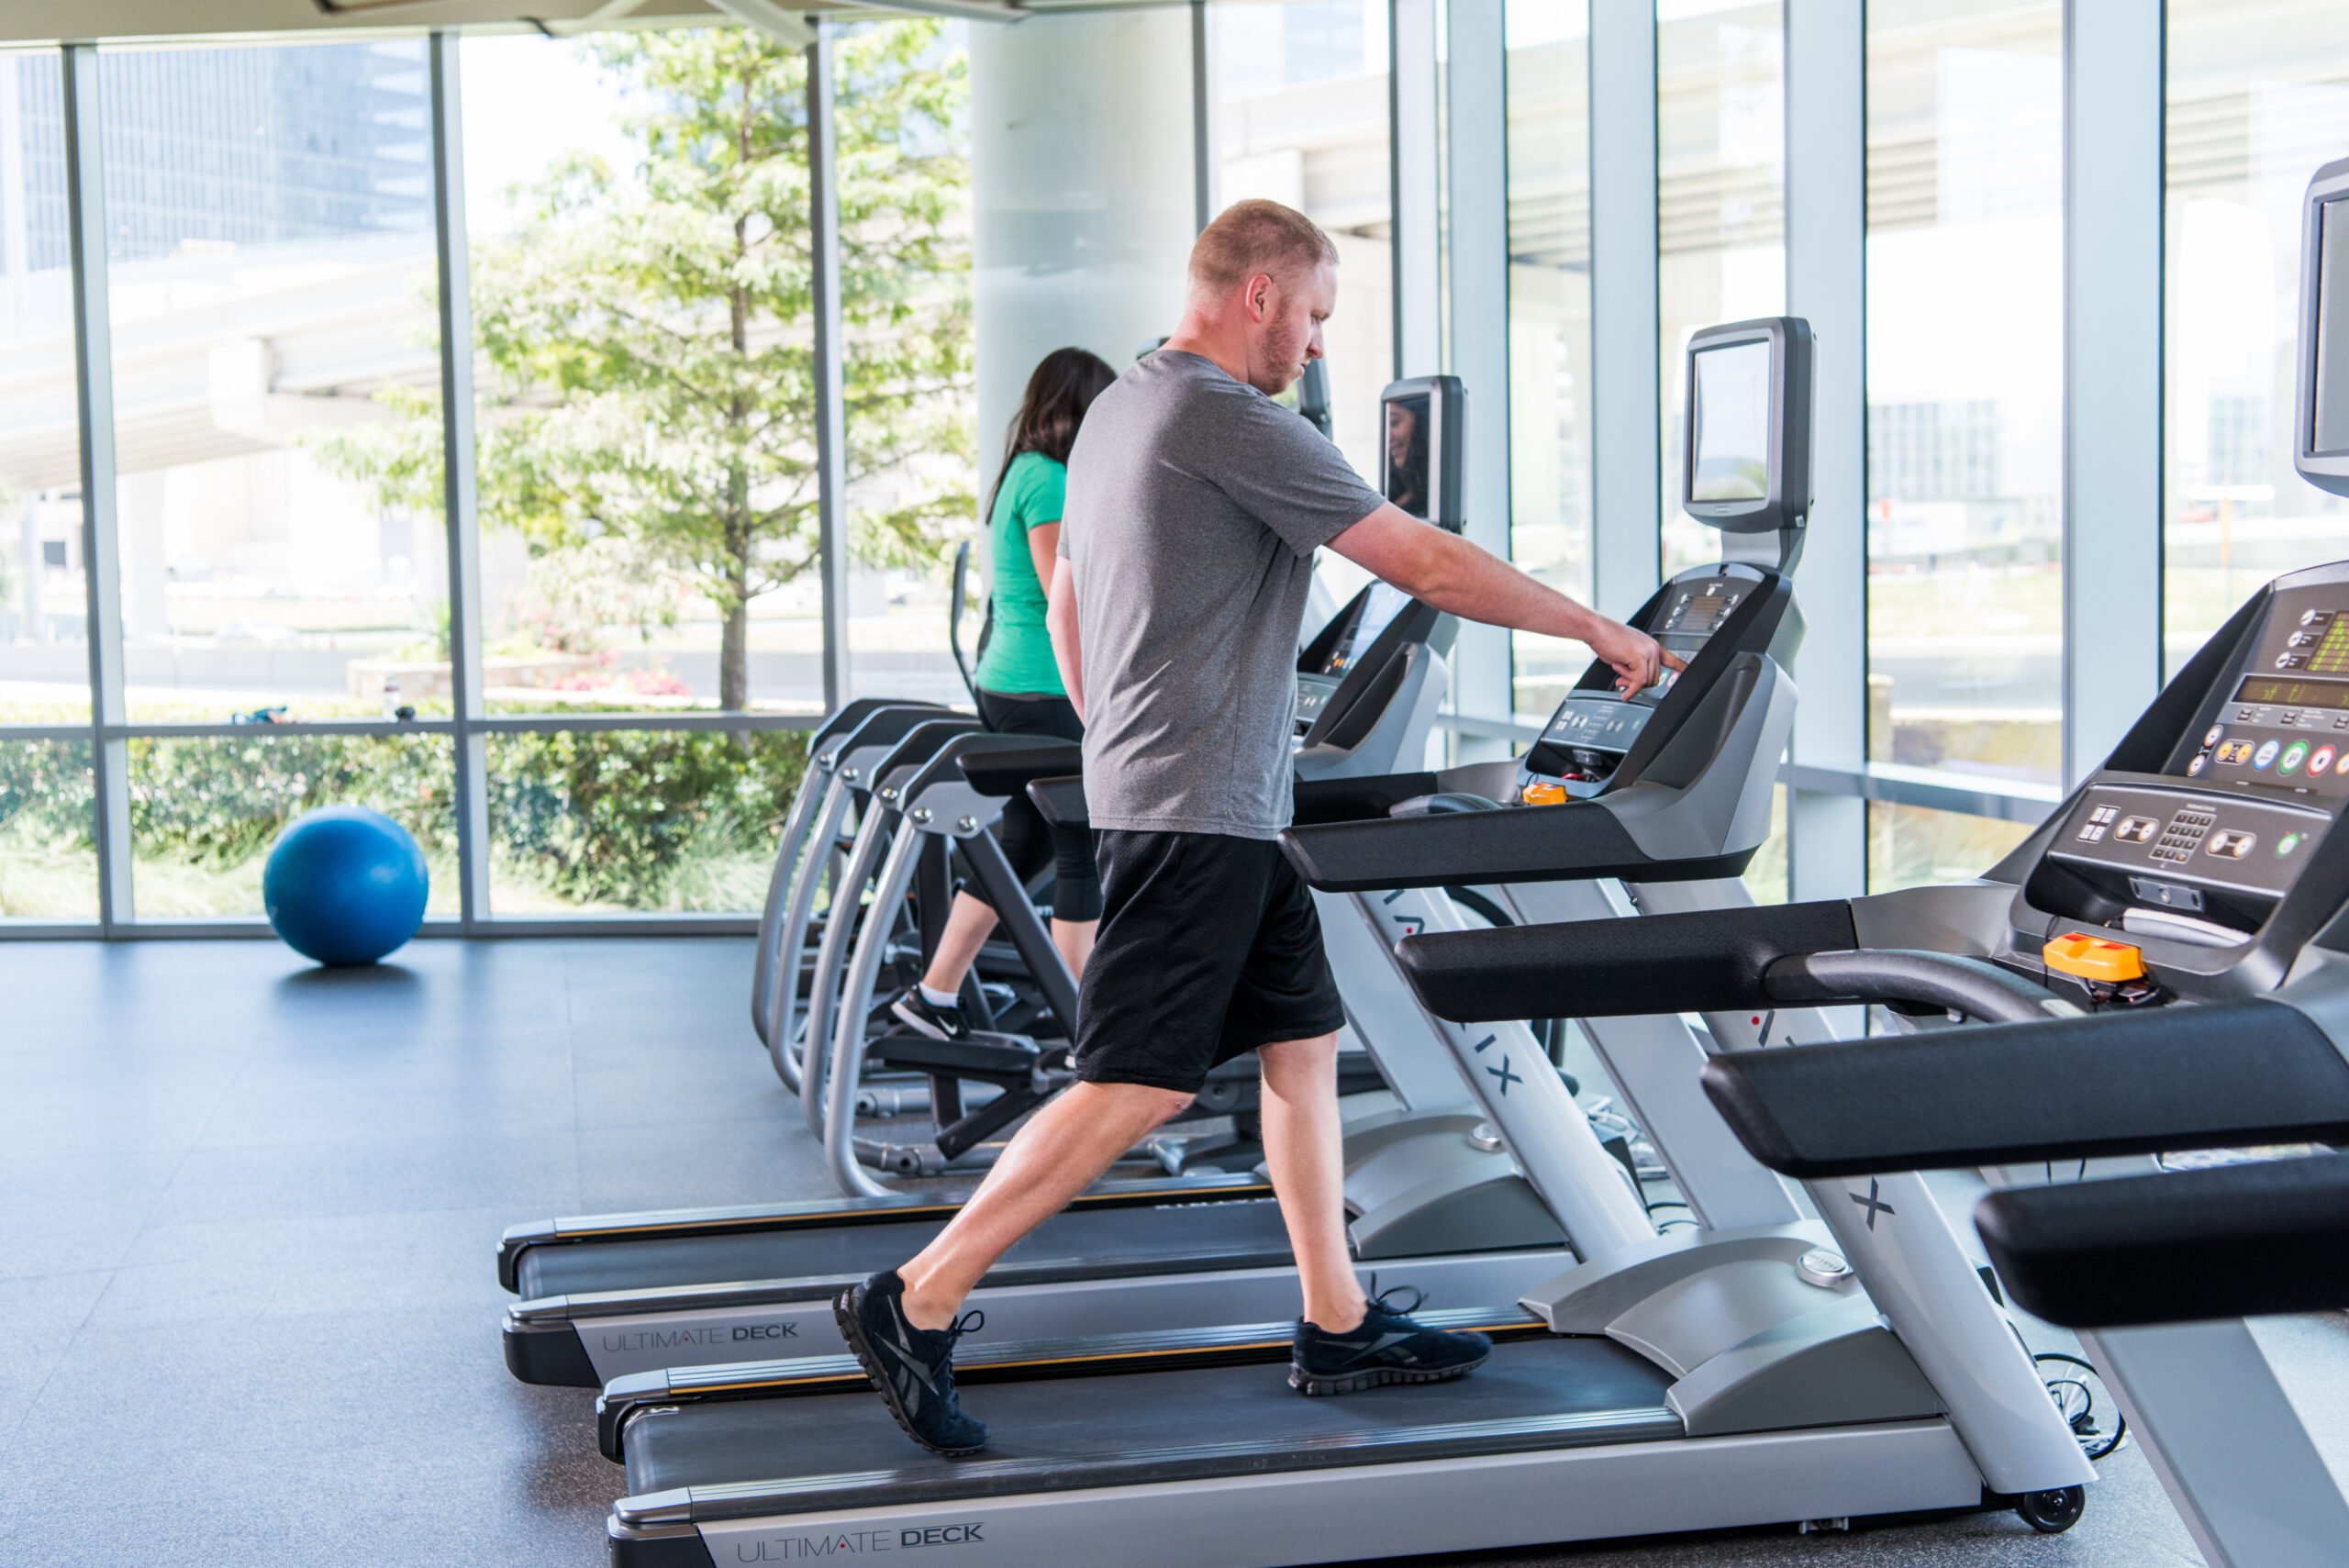 Prepare an Emergency Plan for Your Fitness Center